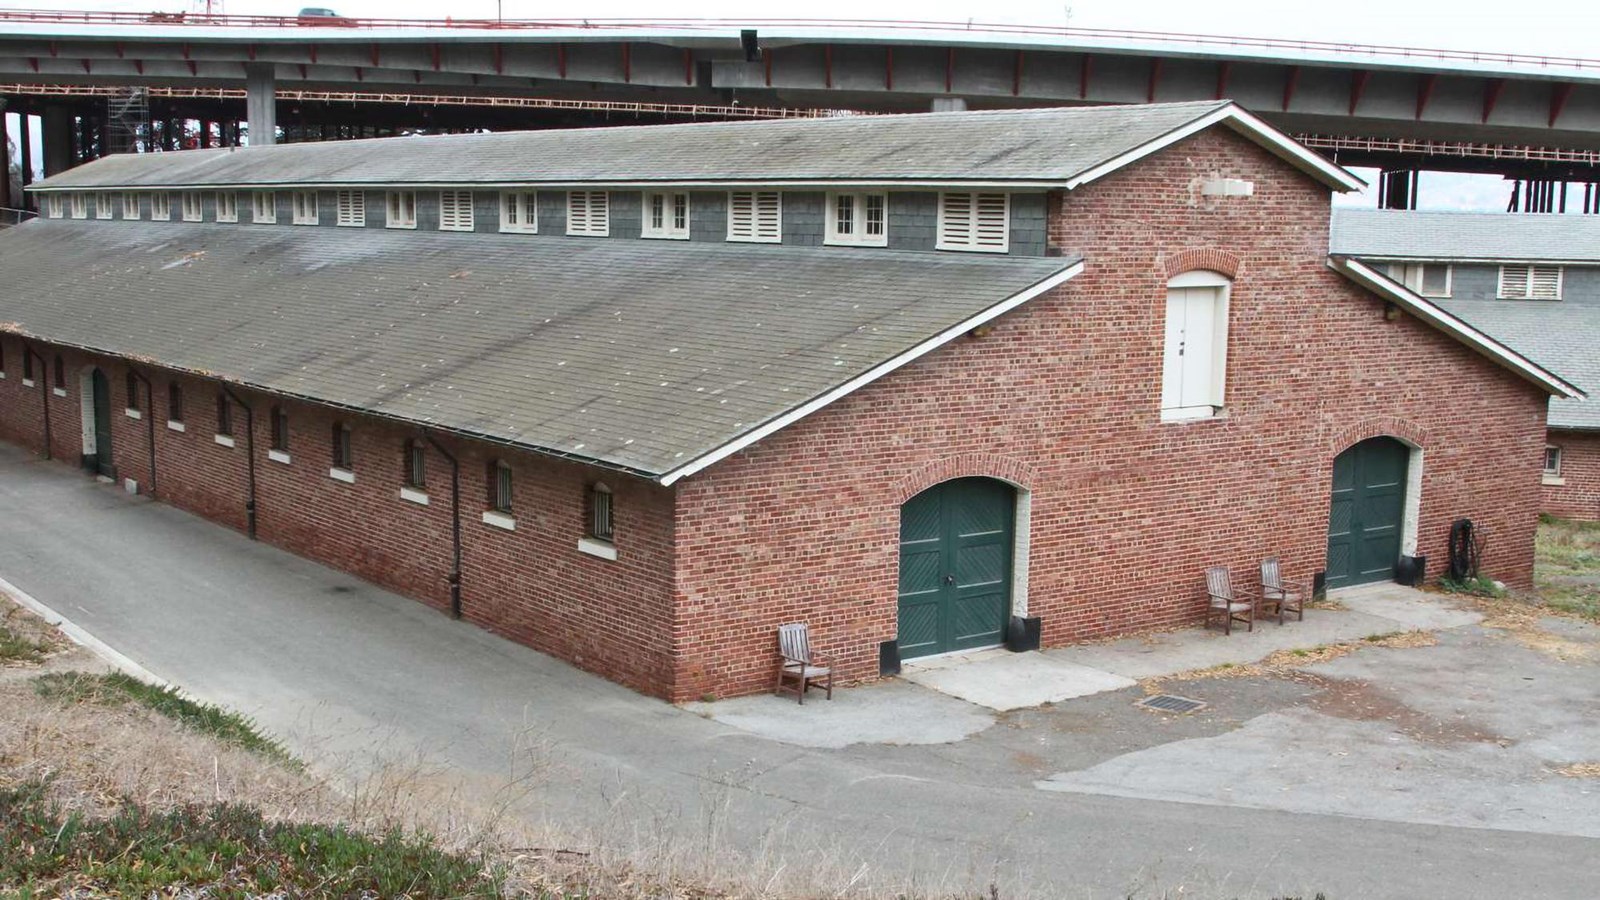 Red brick stables building with gray slate roof as they are today.